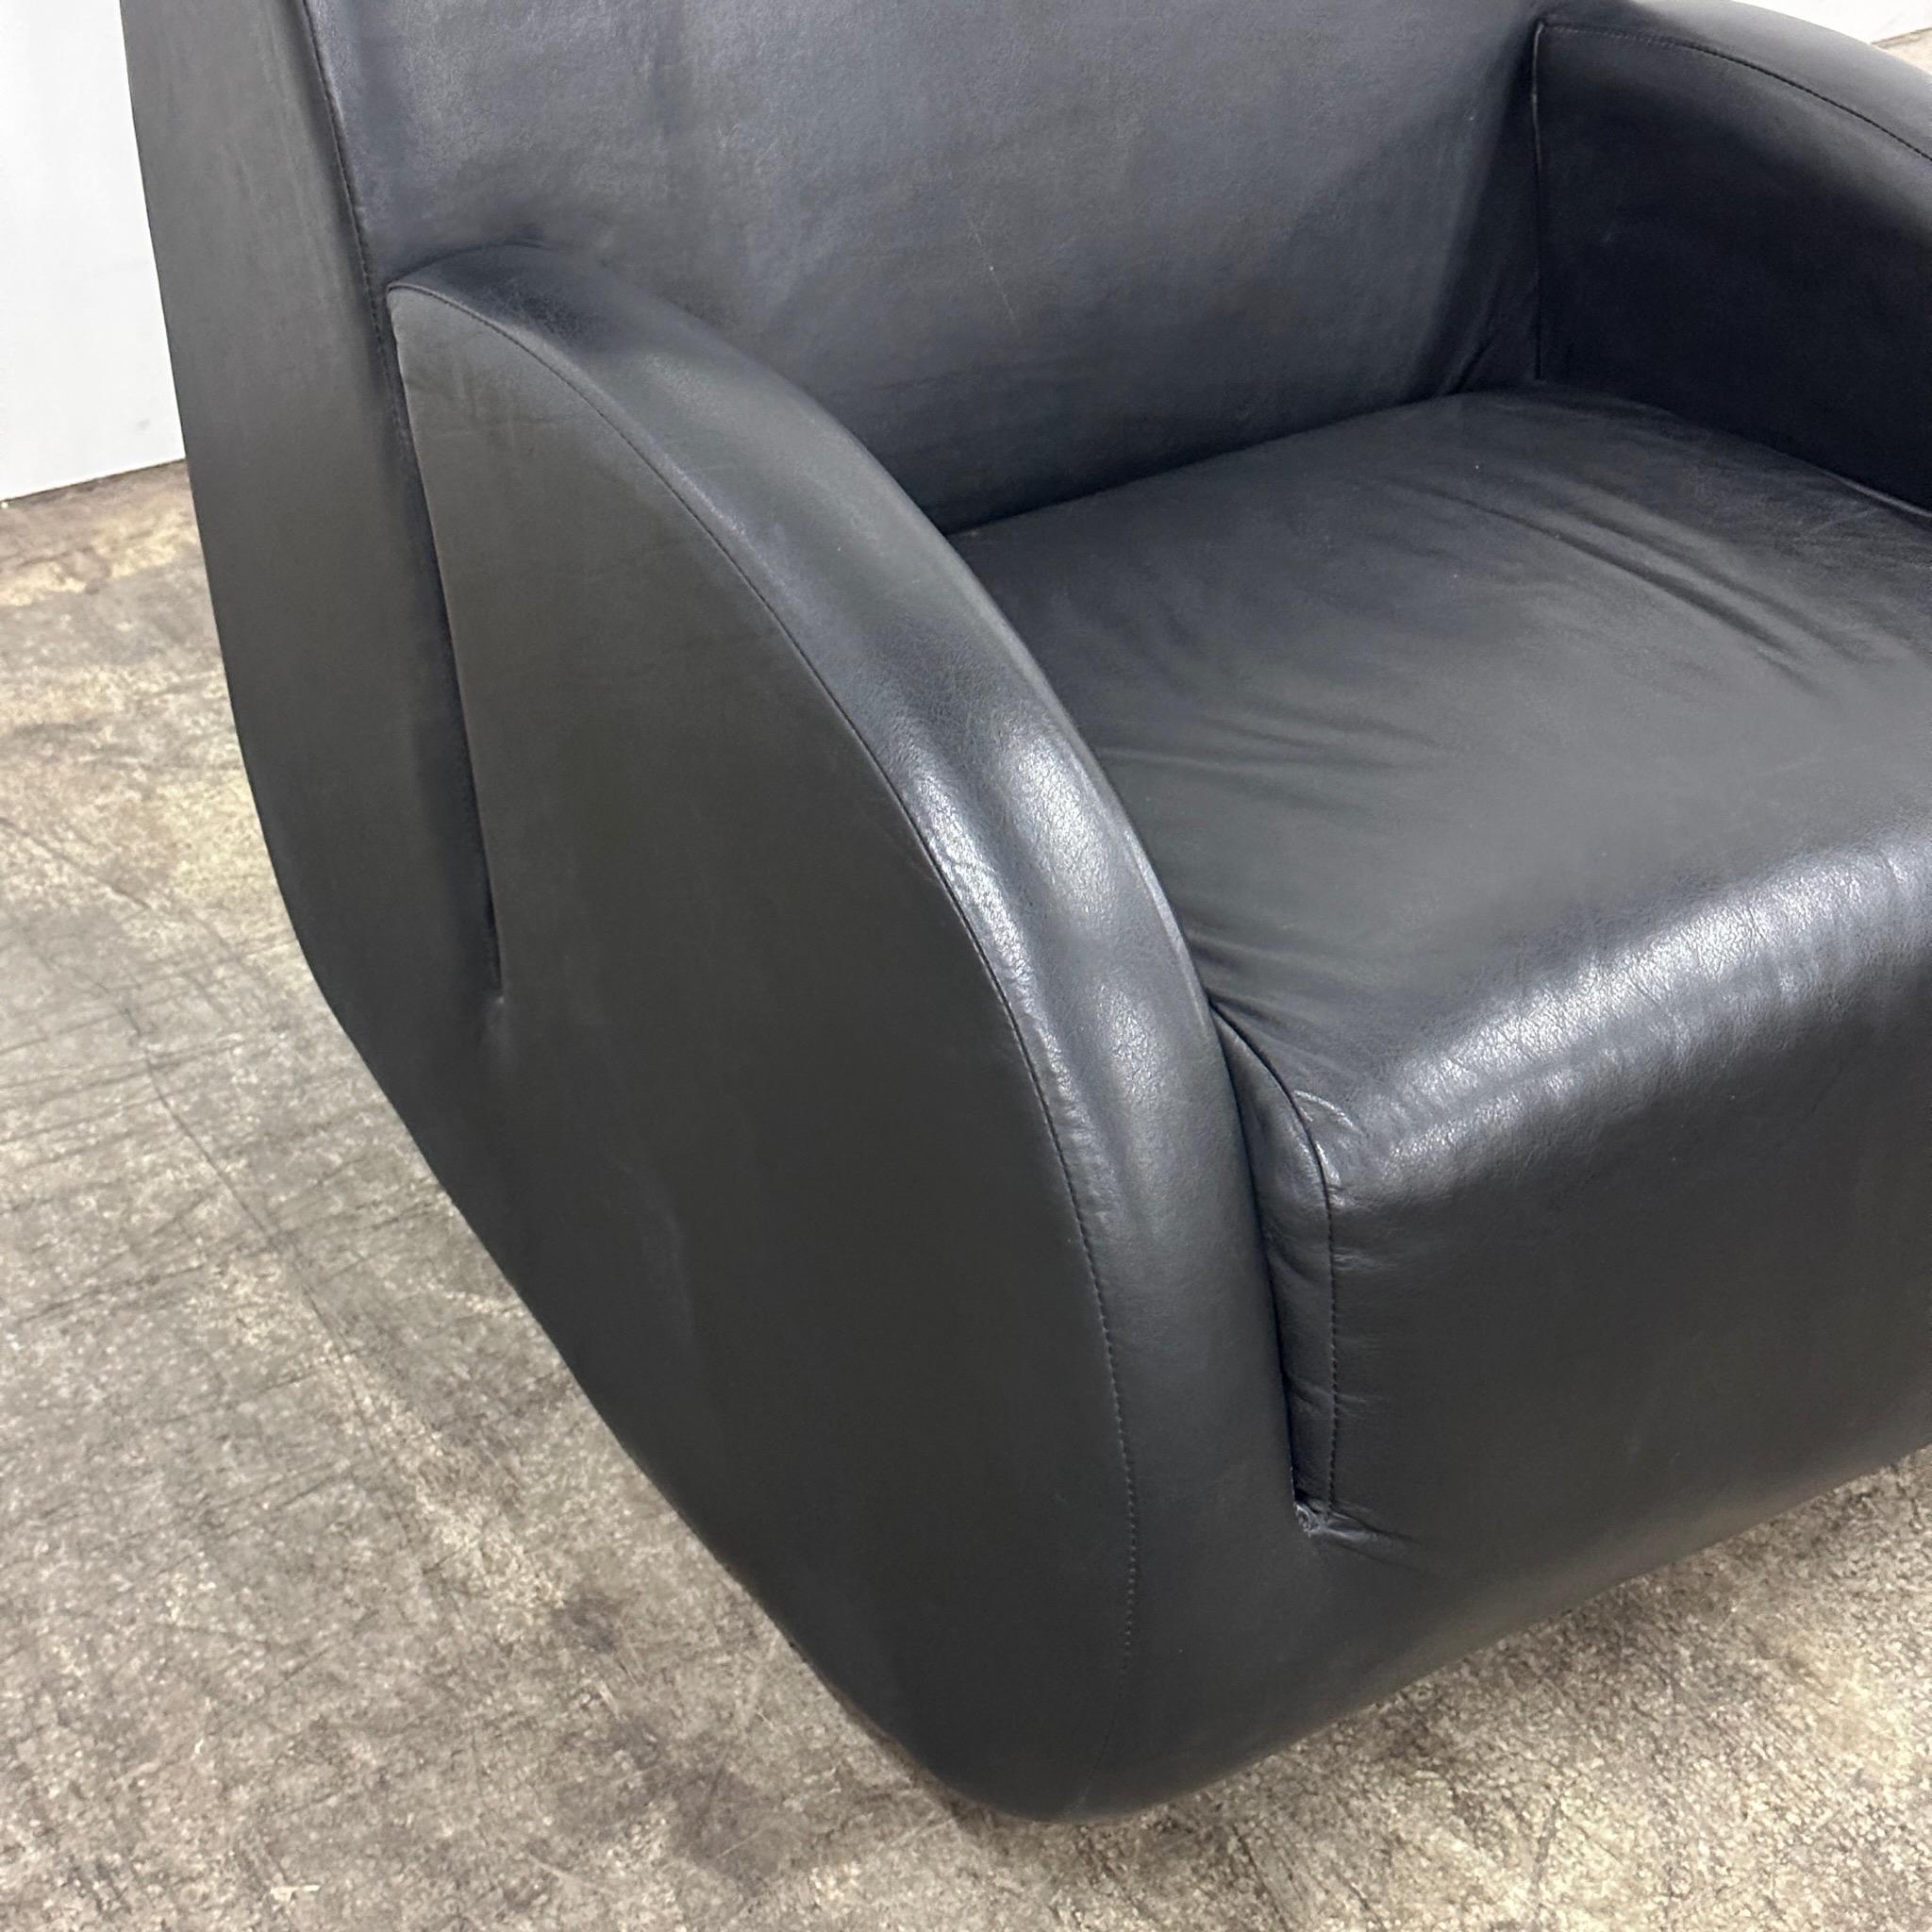 Rockstar Chair by Vladimir Kagan for American Leather In Good Condition For Sale In Chicago, IL